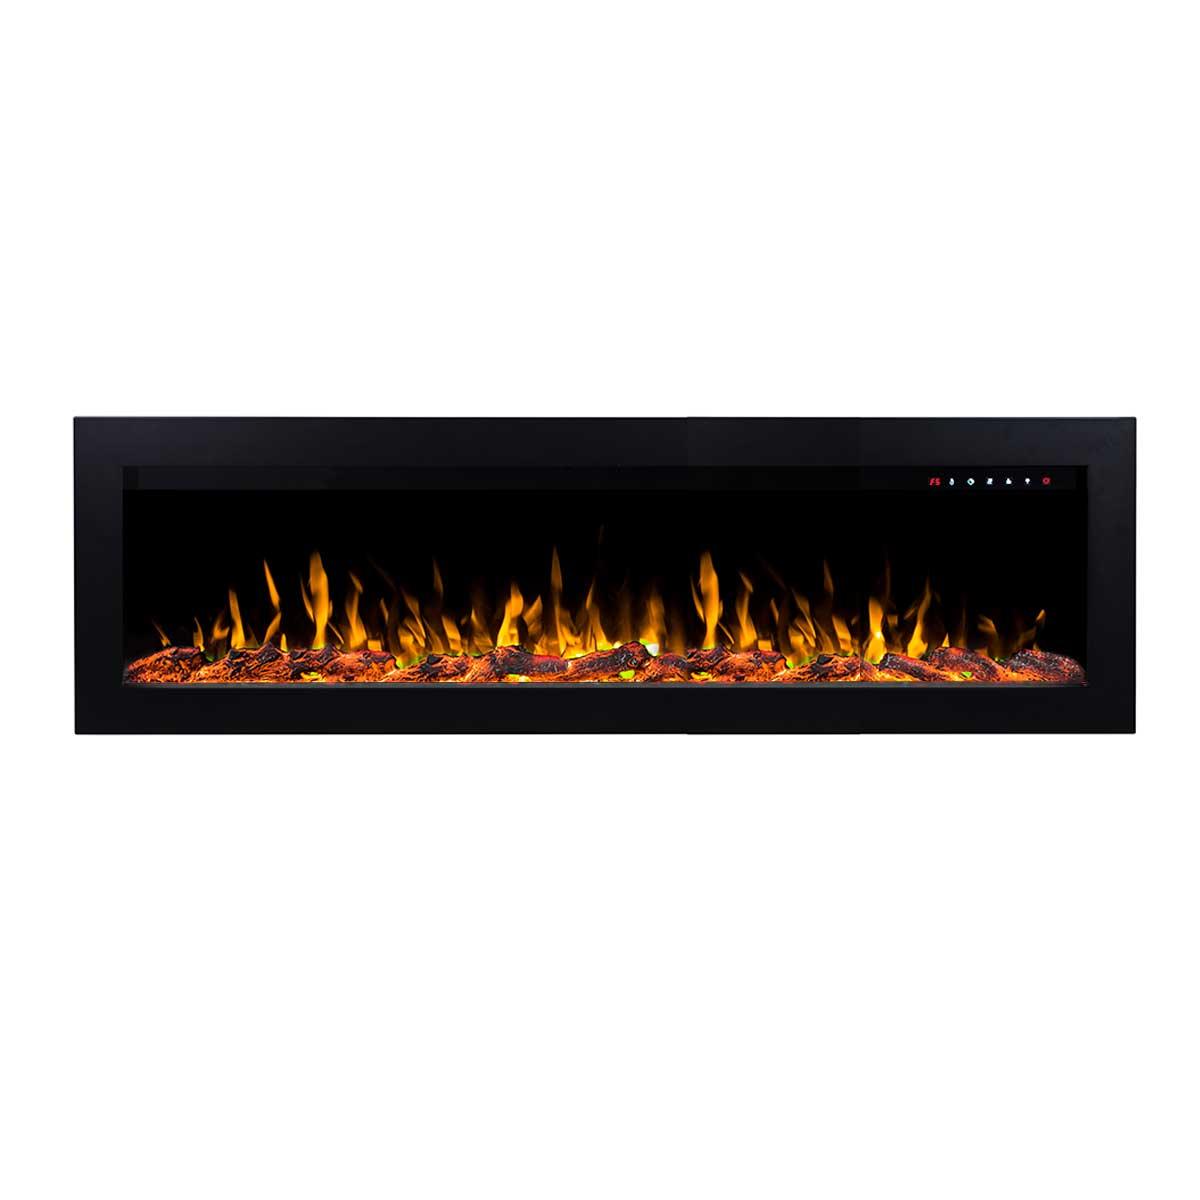 Sonata 1500W 60 inch Built-in Recessed Electric Fireplace